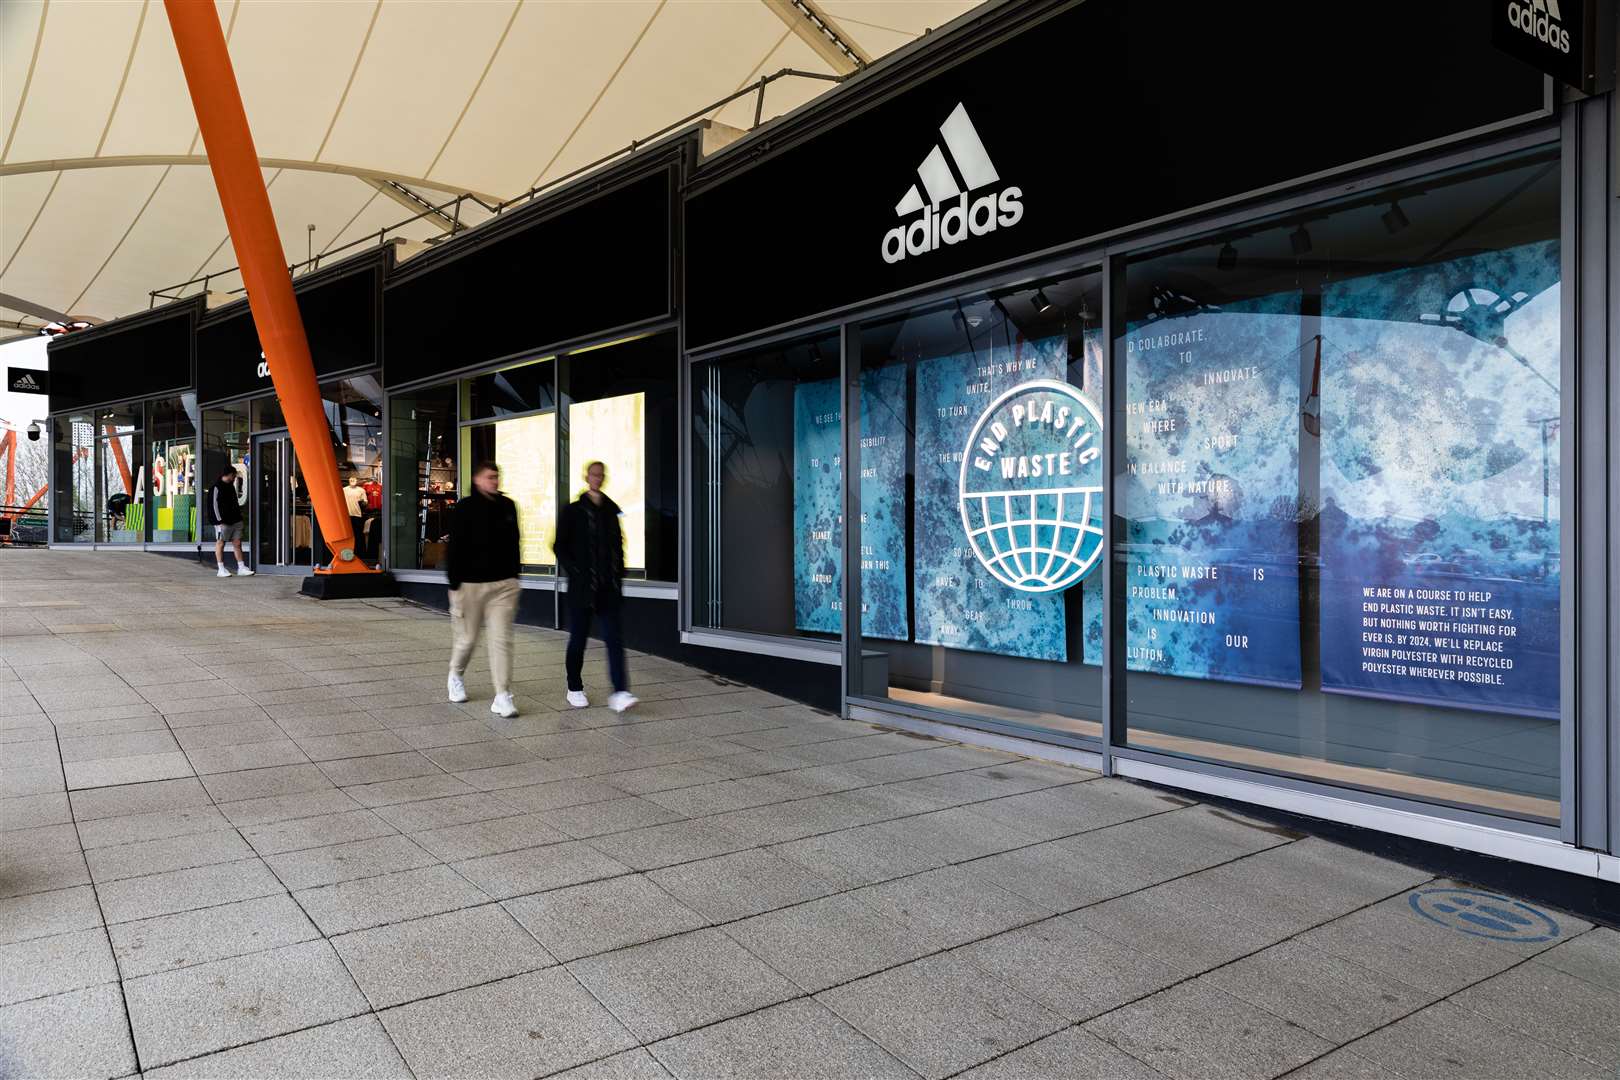 Adidas has reopened in a bigger unit. Picture: McArthur Glenn